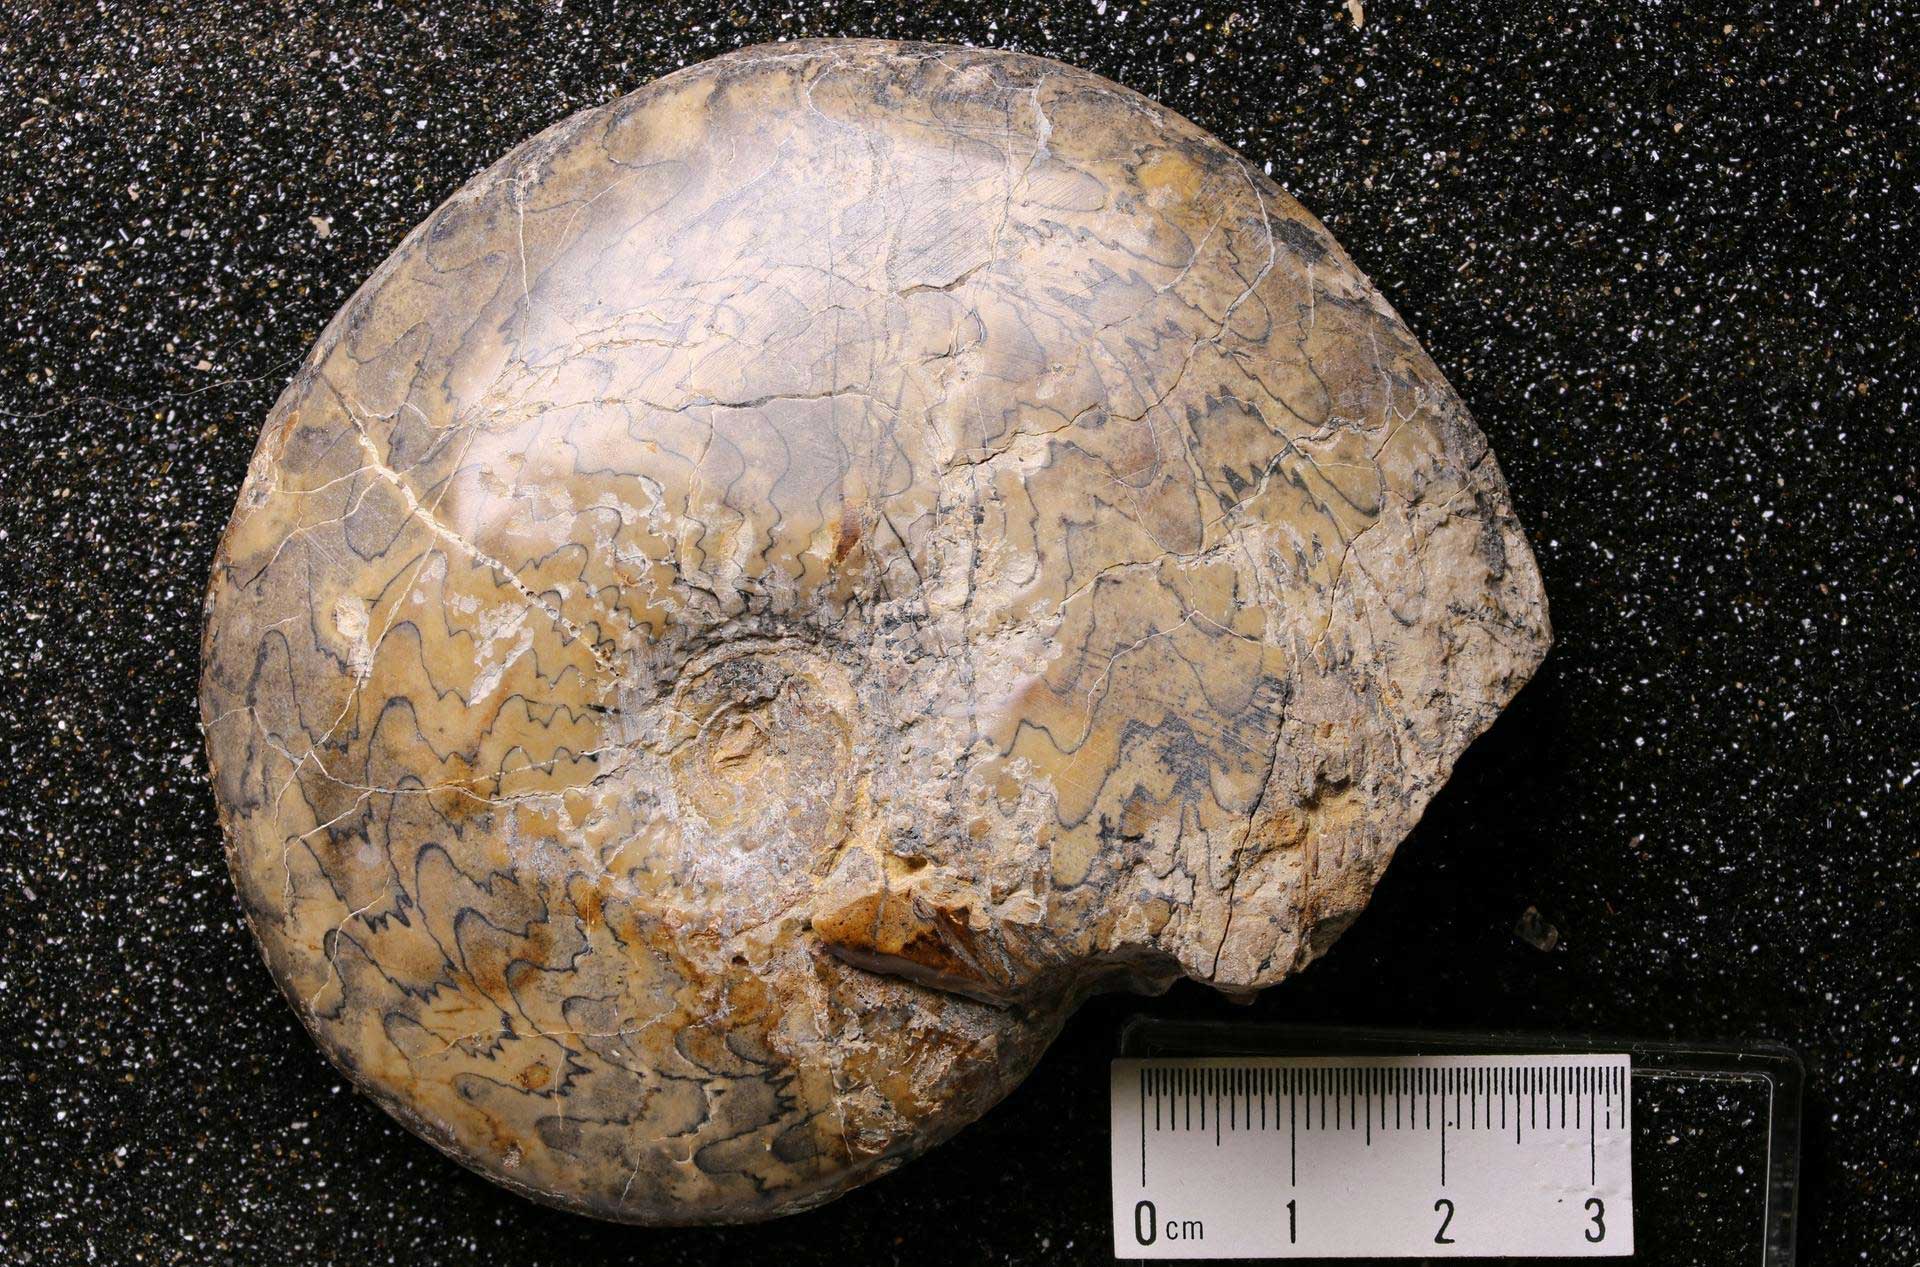 Photograph of a Triassic ammonoid from Utah. The ammonoid shell is spiraling in a single plane. The shell is yellowish brown and the sinuous sutures appear black. The shell is probably about 9 centimeters across (scale bar is 3 centimeters, less than half of shell width.)